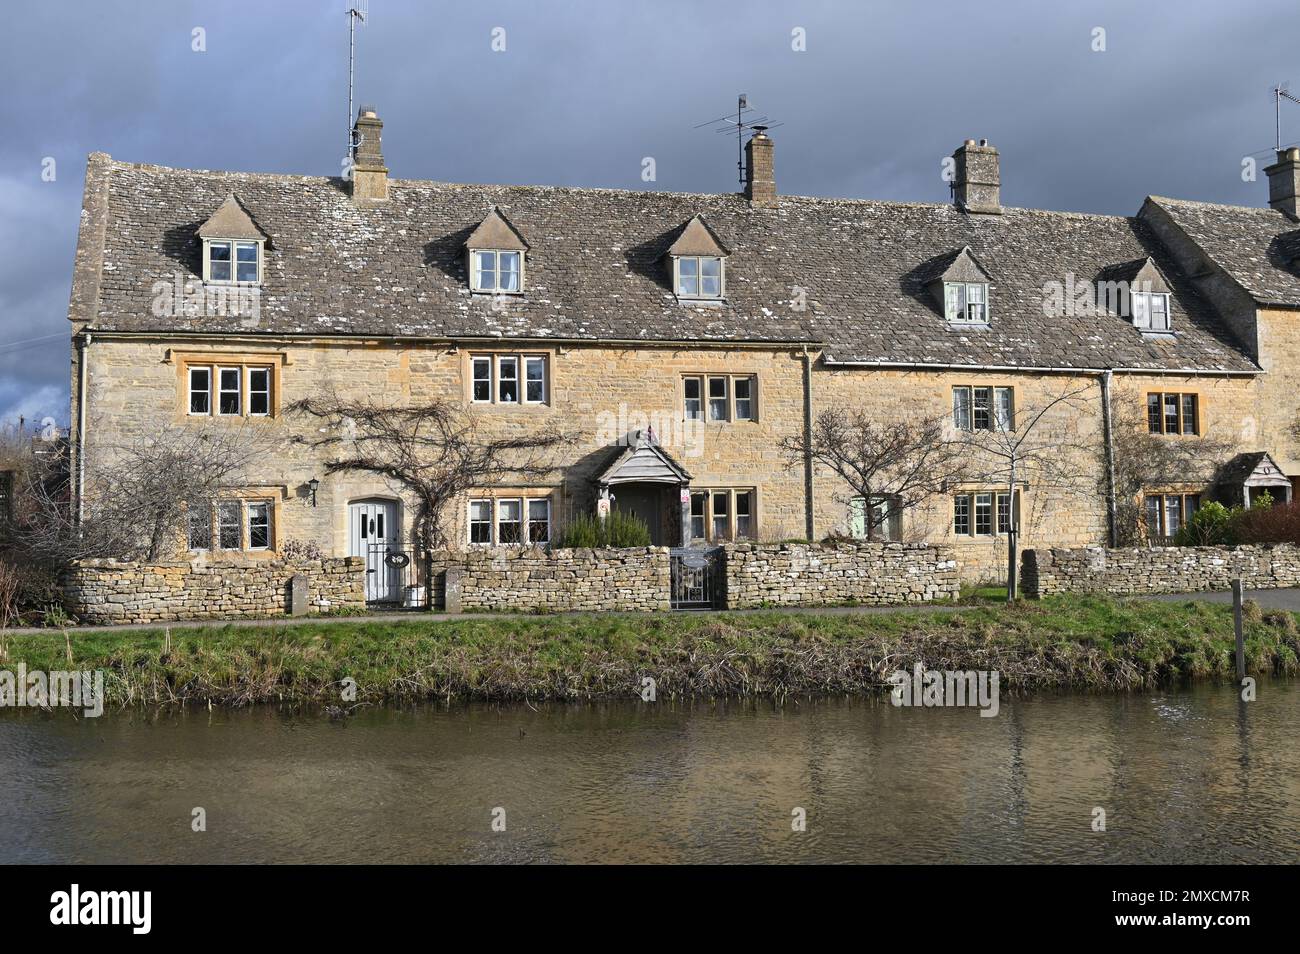 A row of houses on the bank of the River Eye in the Cotswold village of Lower Slaughter Stock Photo